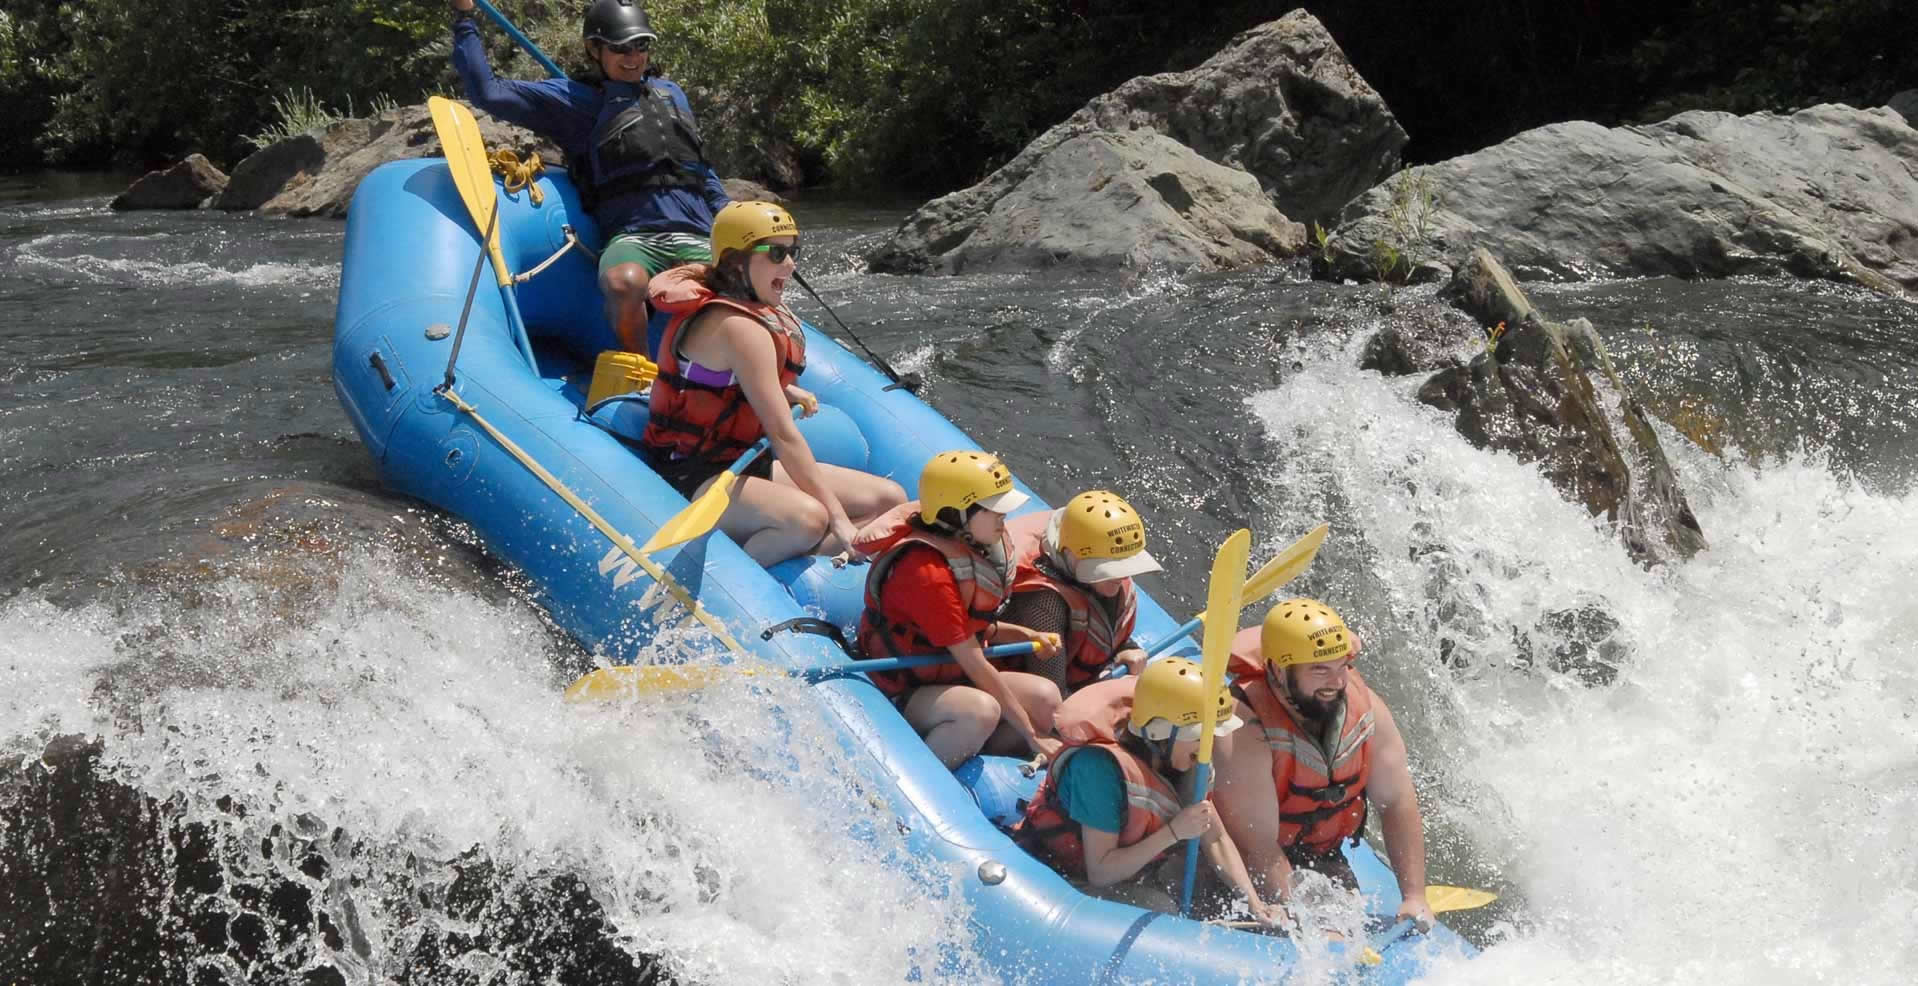 Rafting the American River